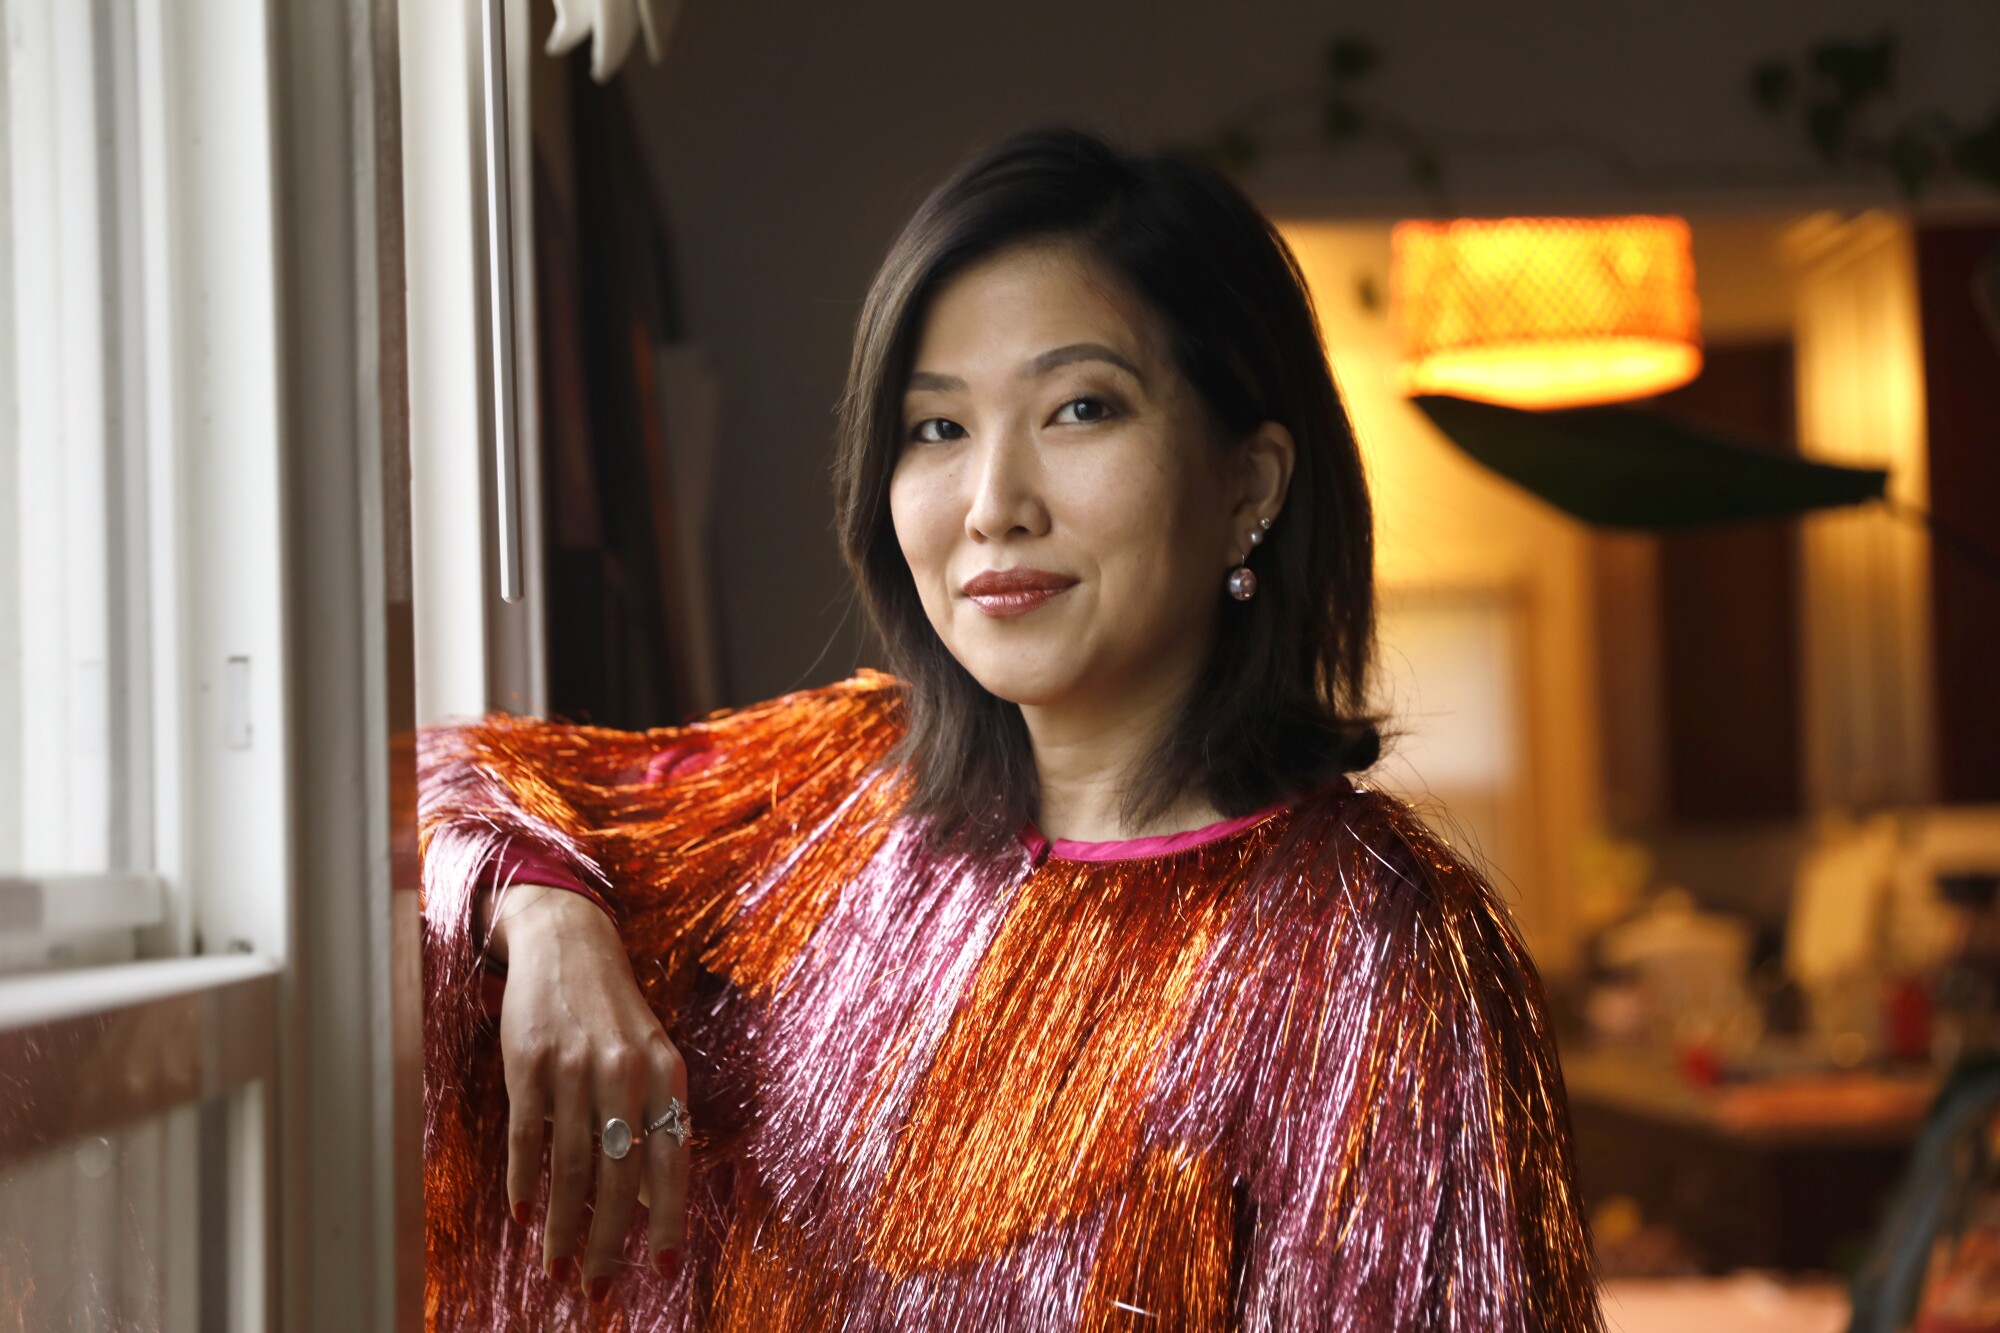 Jean Chen Ho photographed in her home